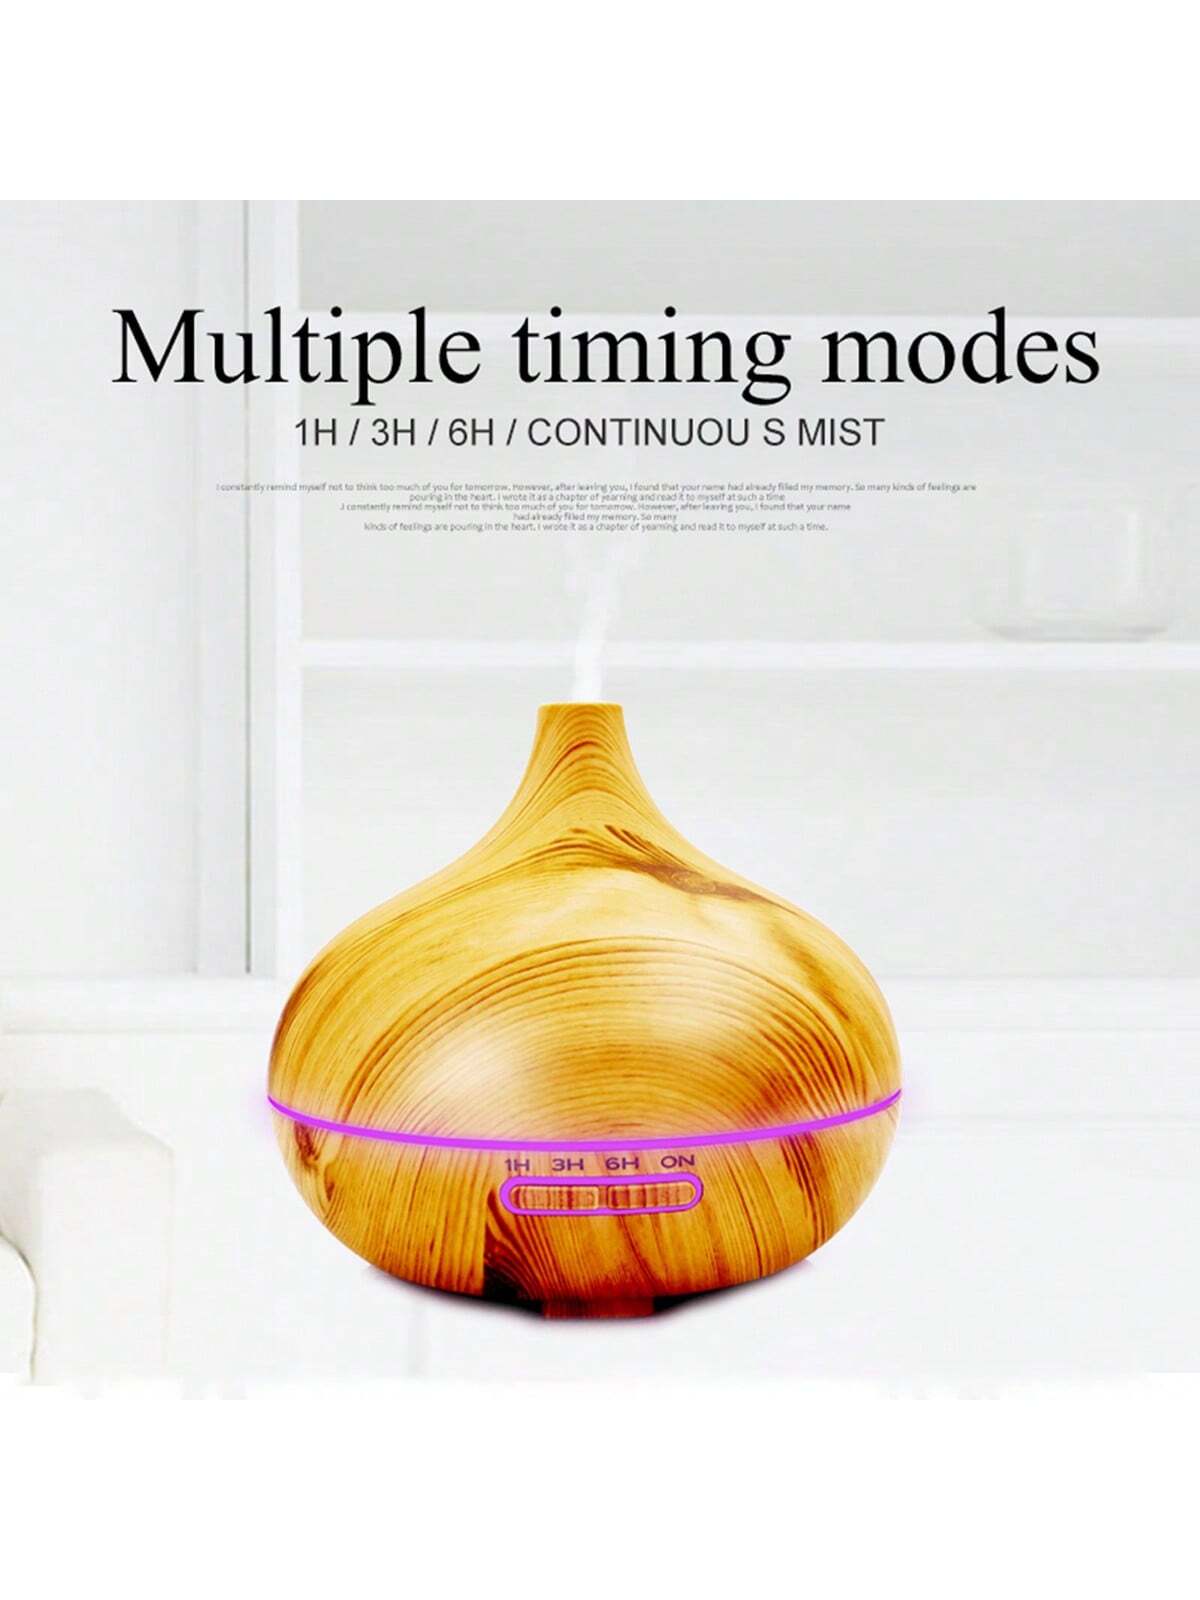 1pc Humidifier300ml Premium, Essential Oil Diffuser with Remote Control, 5 in 1 Ultrasonic Aromatherapy Fragrant Oil Humidifier Vaporizer, Timer and Auto-Off Safety Switch-wood color-4